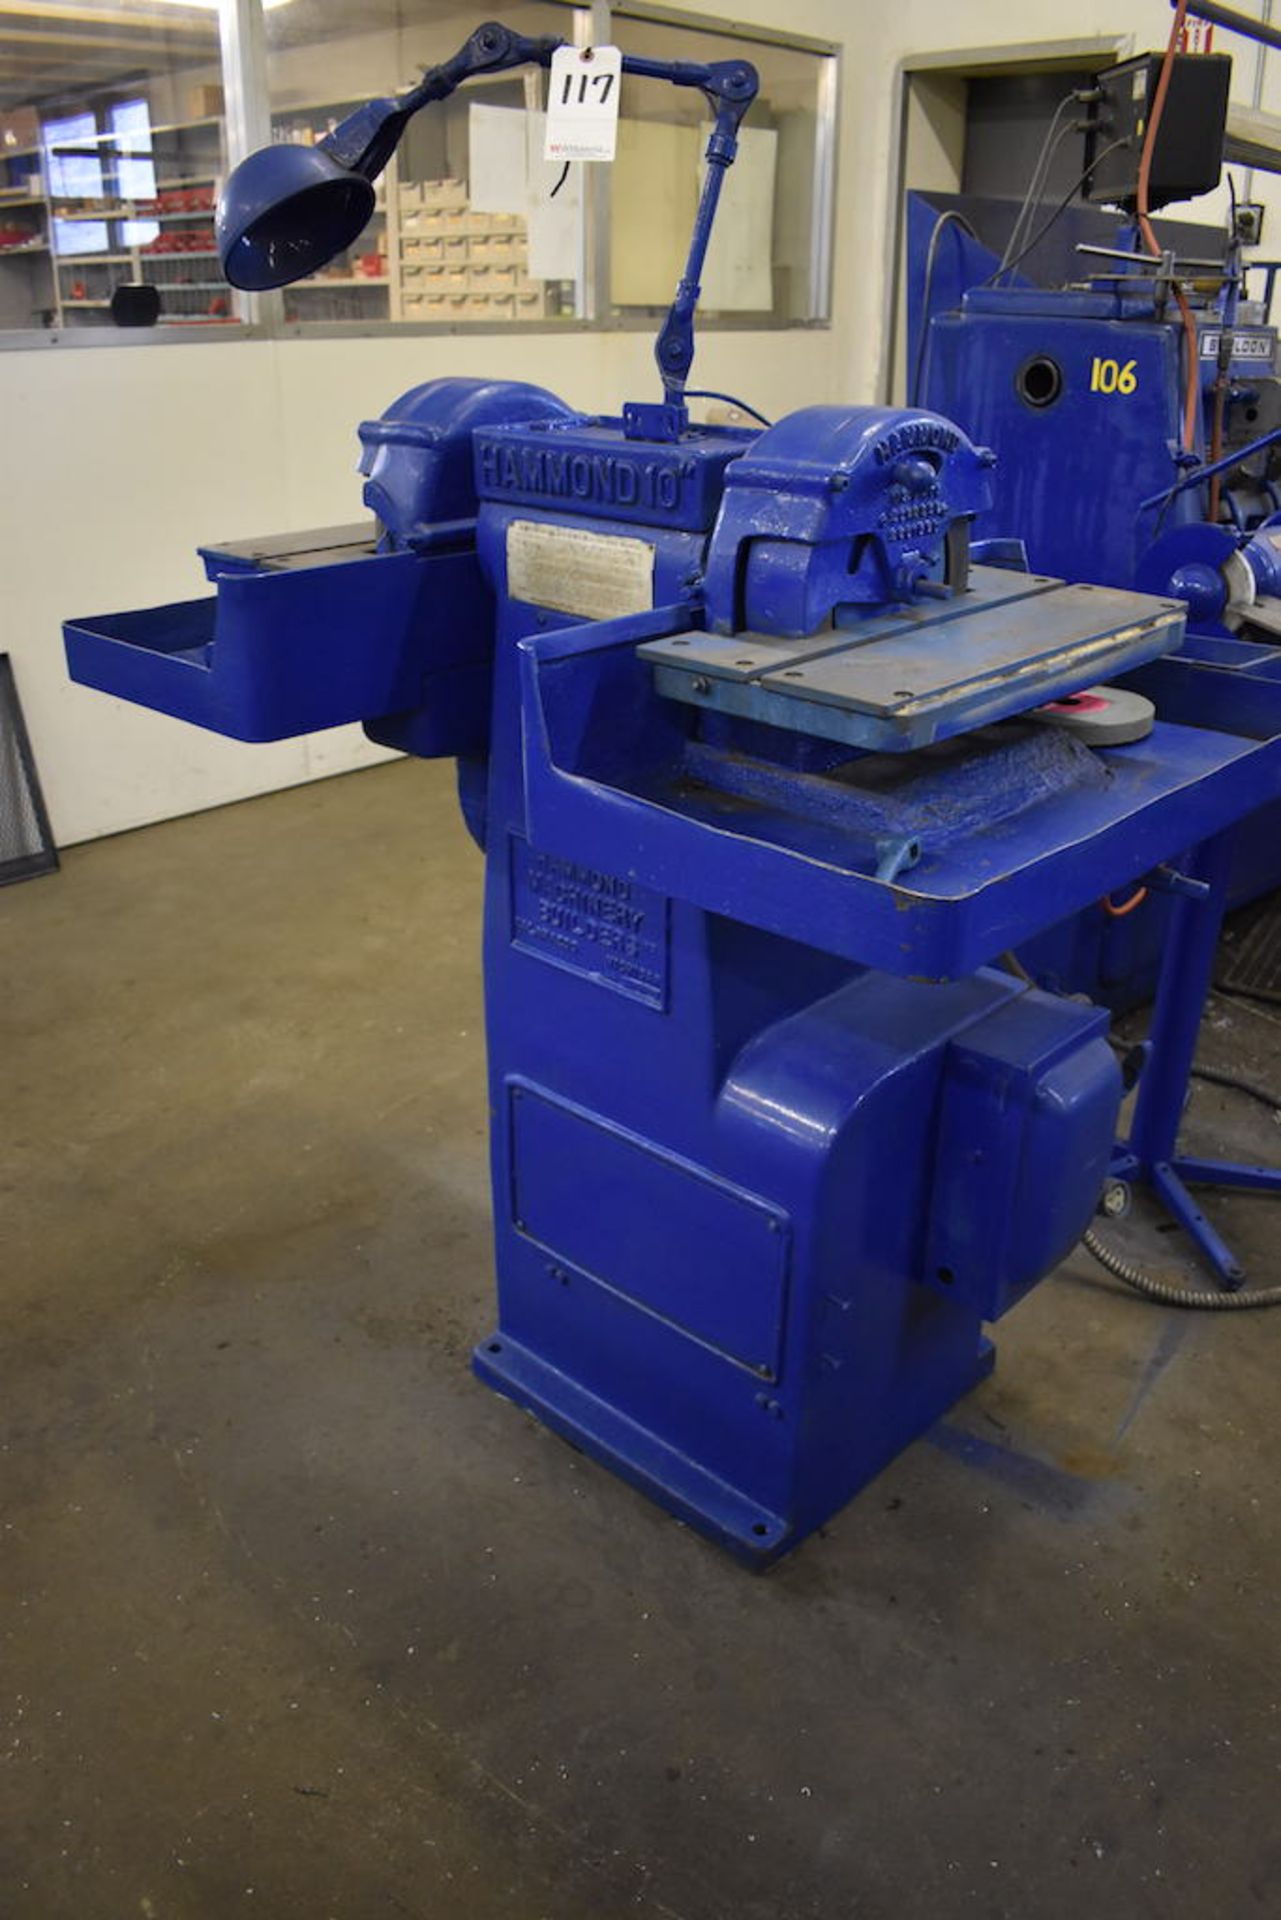 HAMMOND 10" MODEL WD-10 DOUBLE END CARBIDE TOOL GRINDER: S/N 8660; W/2 HP; 19" X 9-1/2" Table - Image 2 of 5